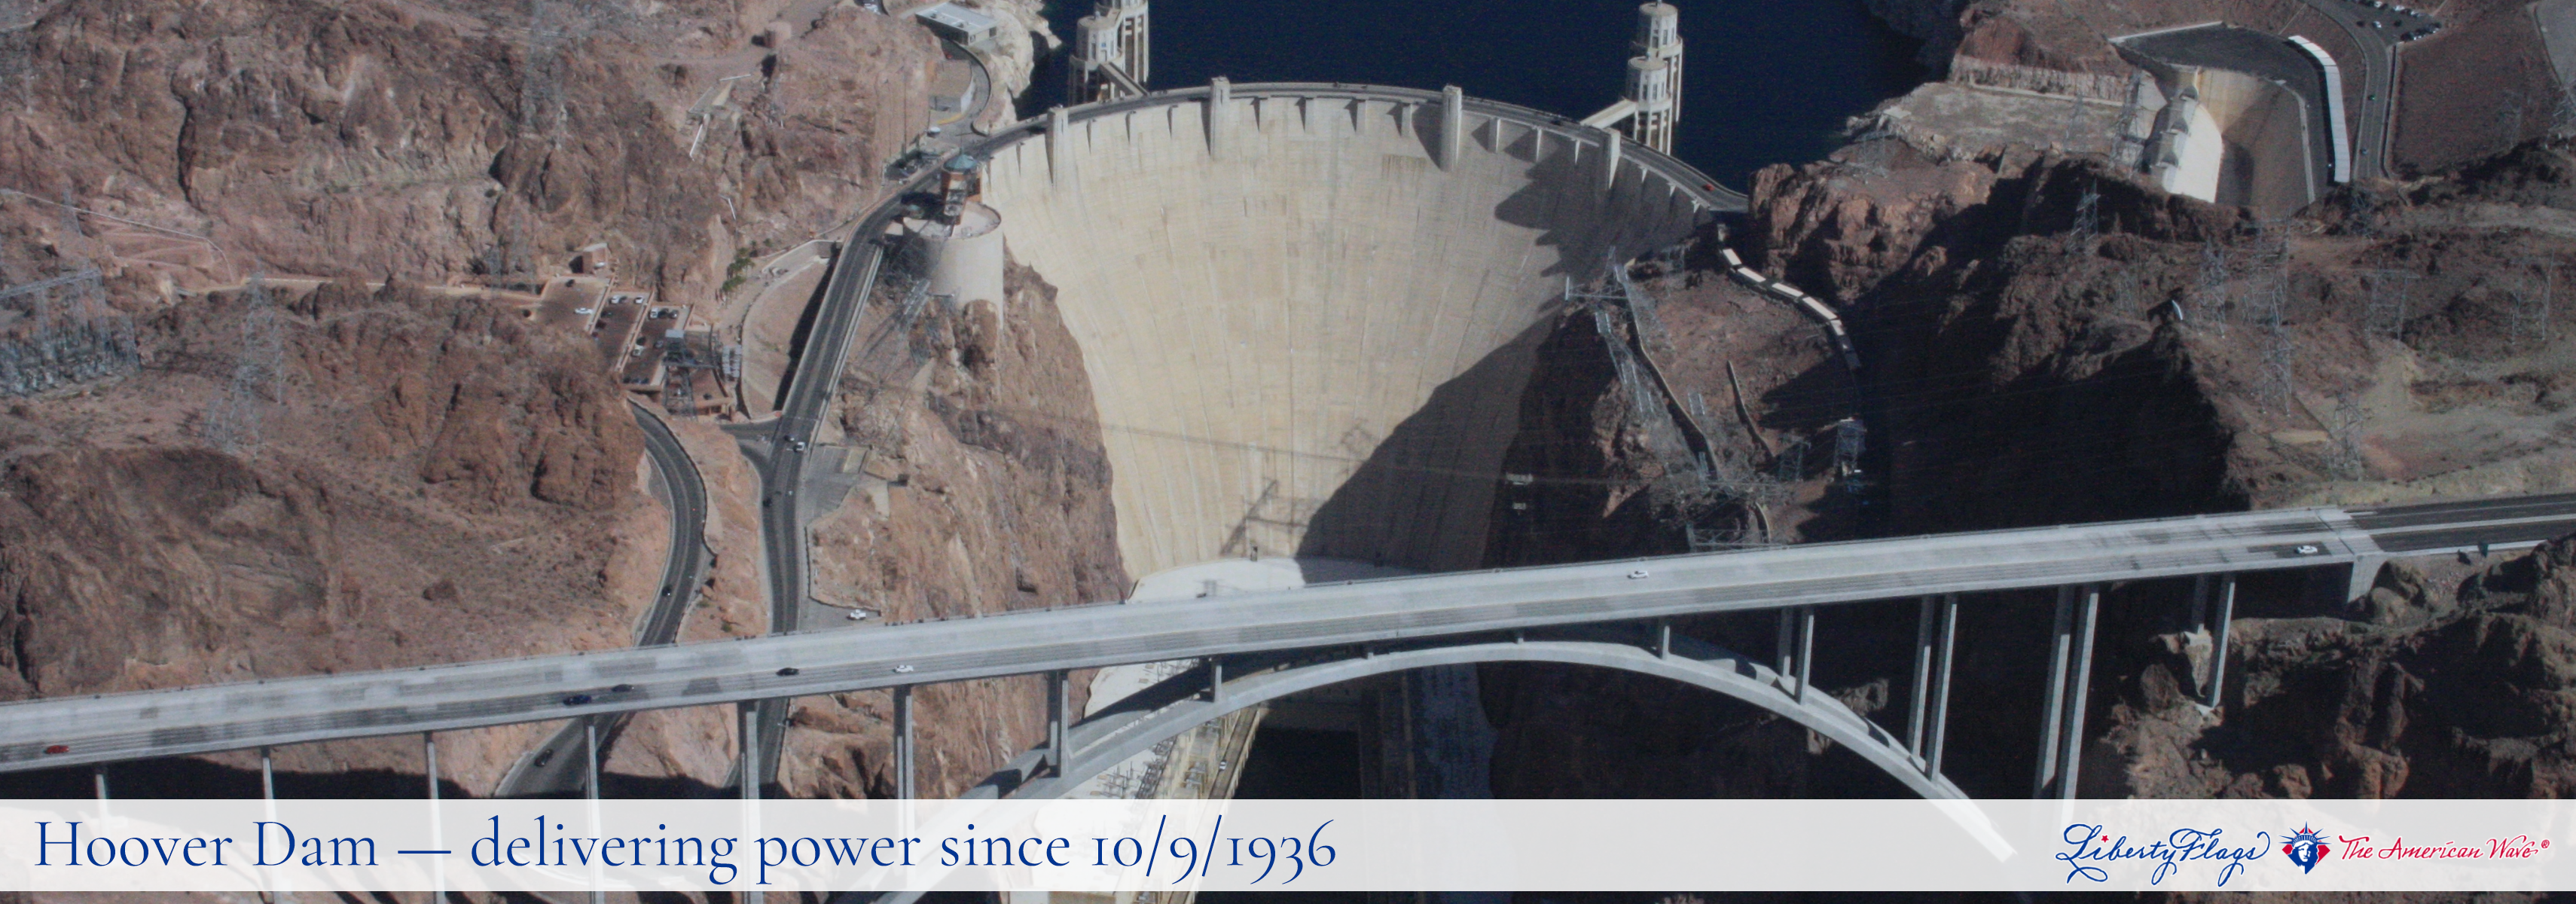 “Getting Power from the Hoover Dam, with LIBERTY FLAGS, The American Wave®